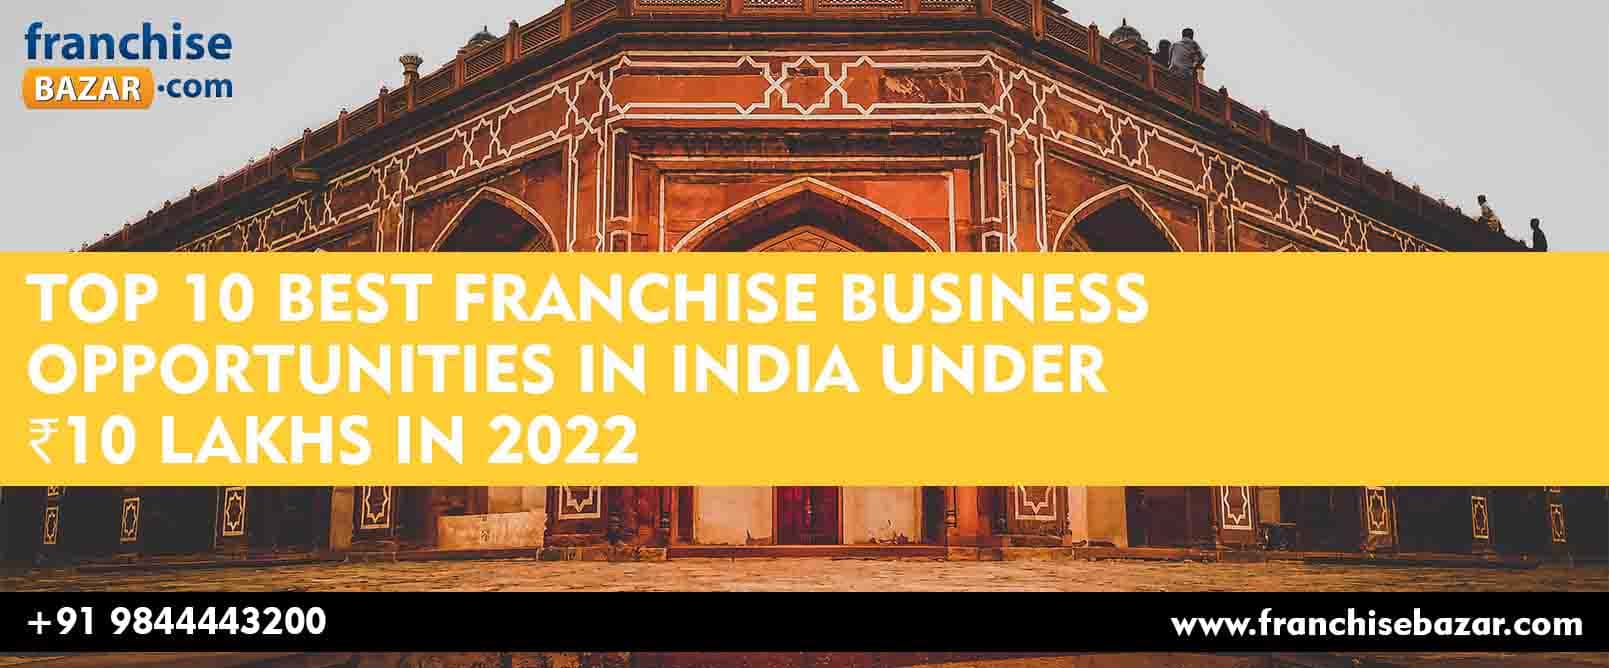 Top 10 Best Franchise Business Opportunities In India Under ₹10 Lakhs In 2022